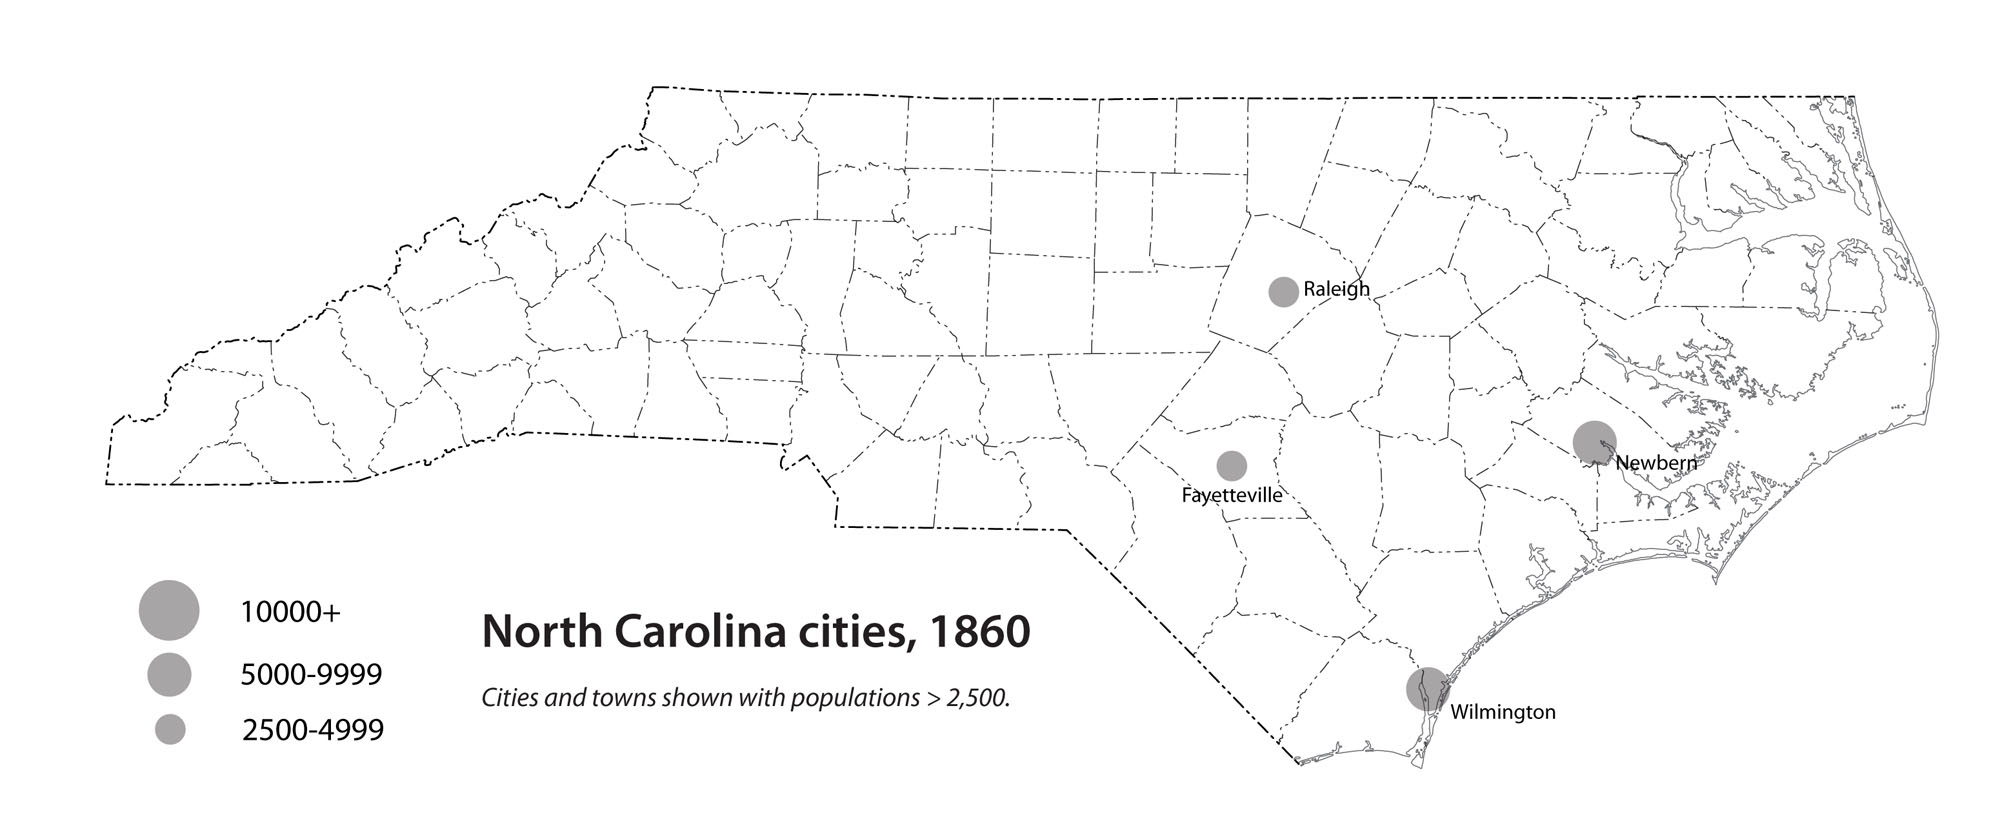 Map of North Carolina cities in 1860